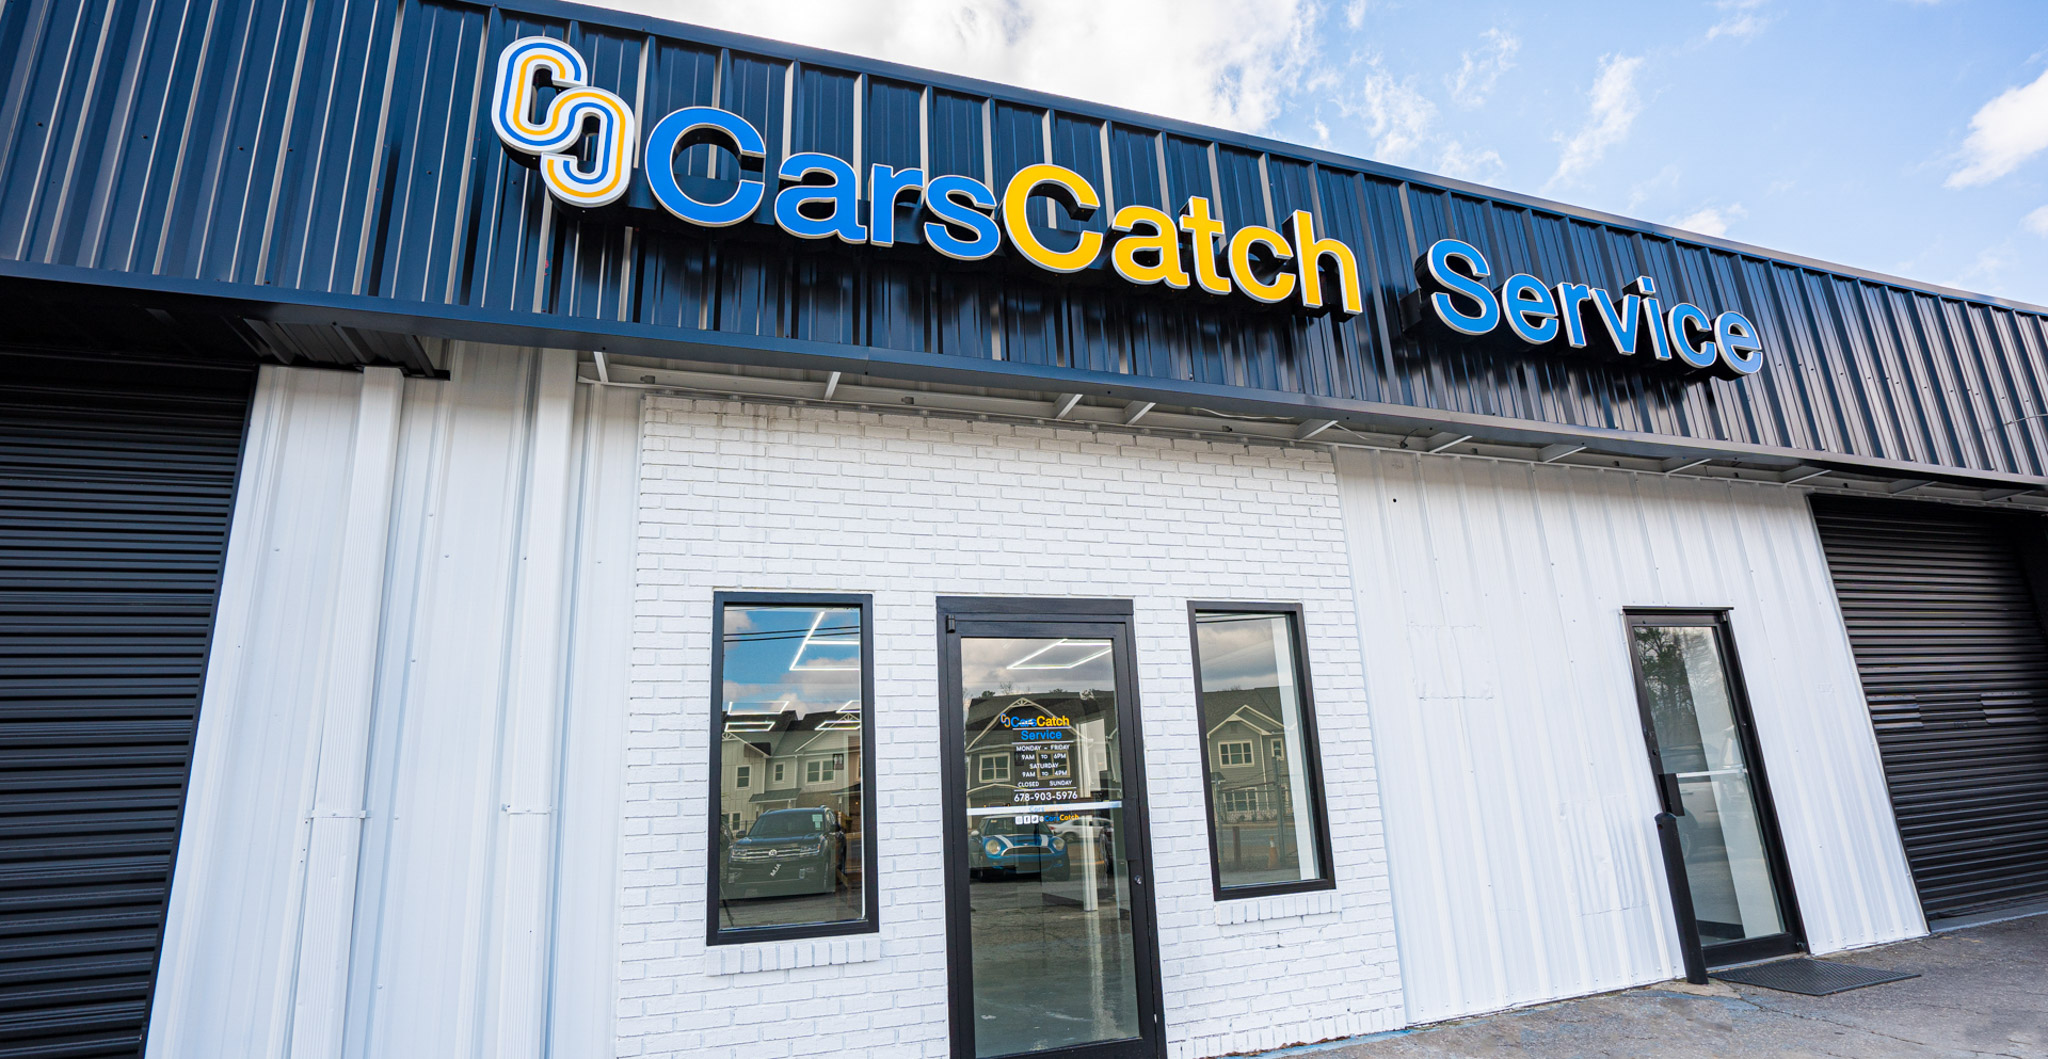 Exterior view of CarsCatch Service building with brand signage.